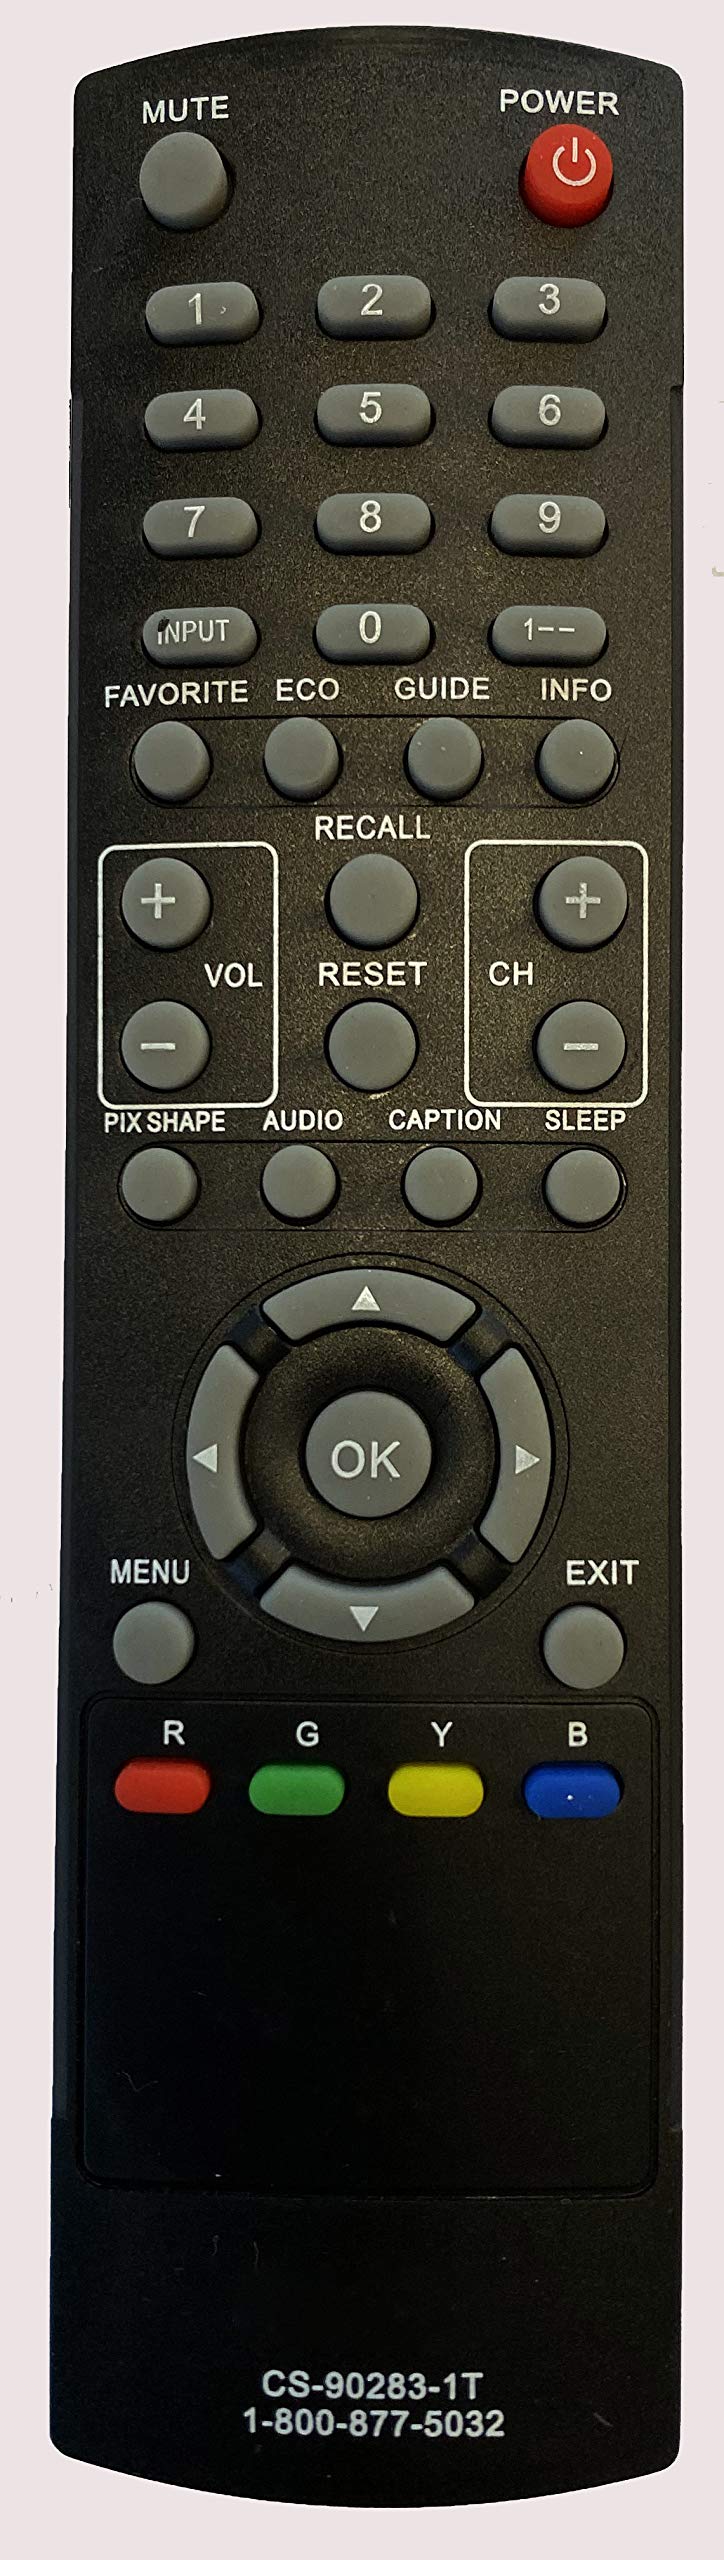 New CS-90283-1T Remote Control Replaced for SANYO TV DP32242 DP55441 DP46142 DP40142 DP42142 DP32640 DP42740 DP42841 DP46841 DP50741 DP50842 DP24E14 - LeoForward Australia